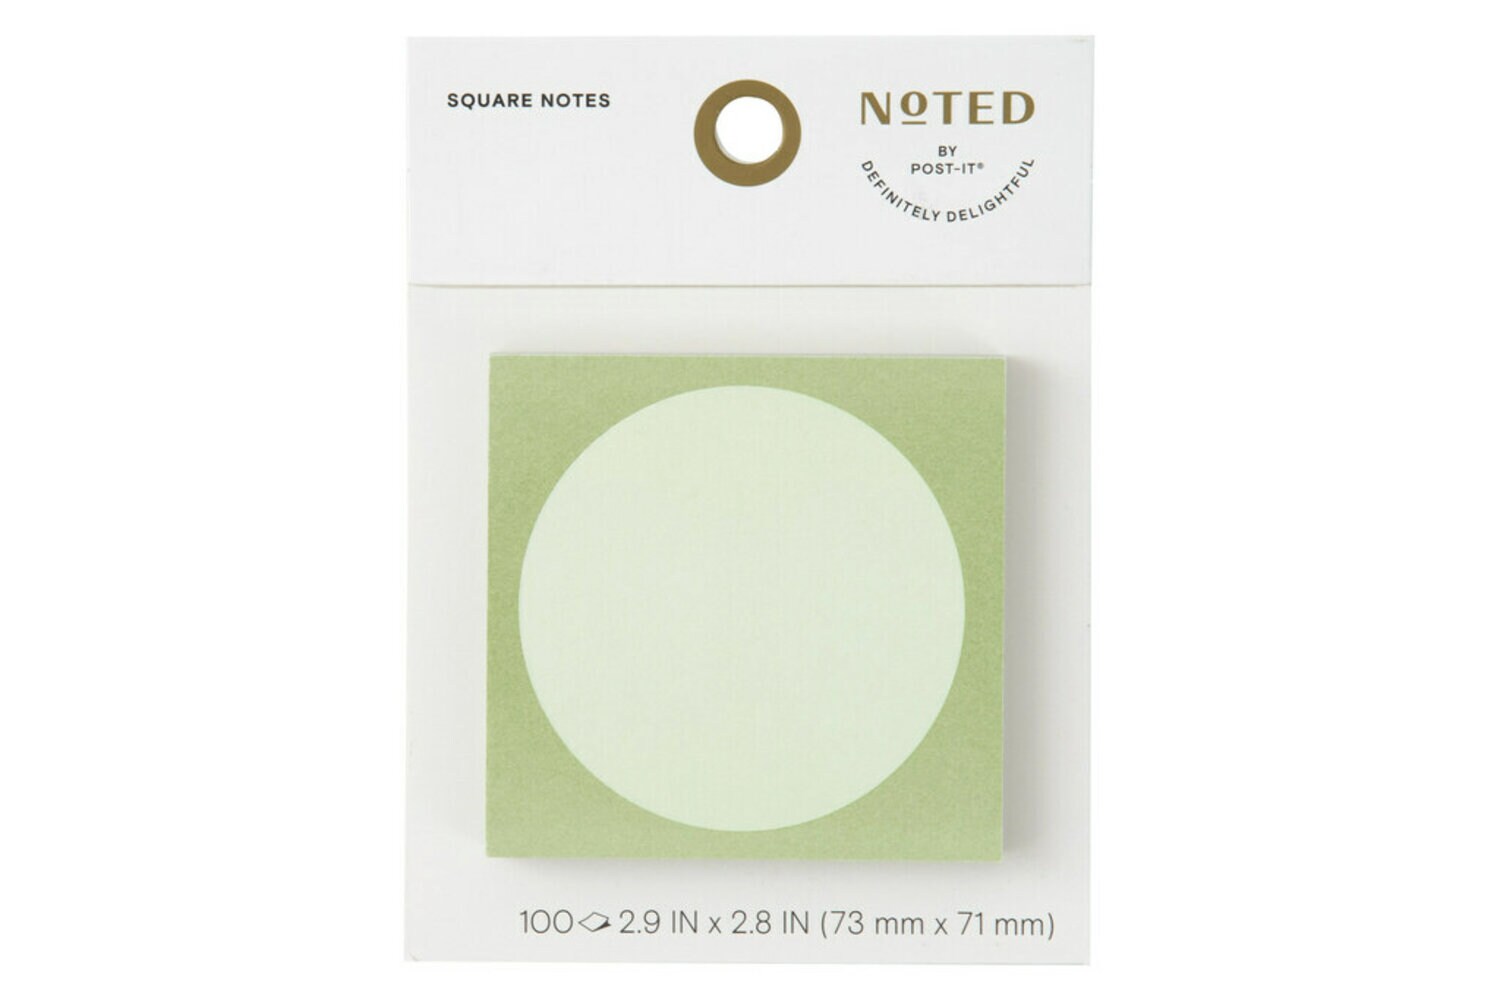 7100275828 - Post-it Square Notes NTD6-33-3, 2.9 in x 2.8 in (73 mm x 71 mm)